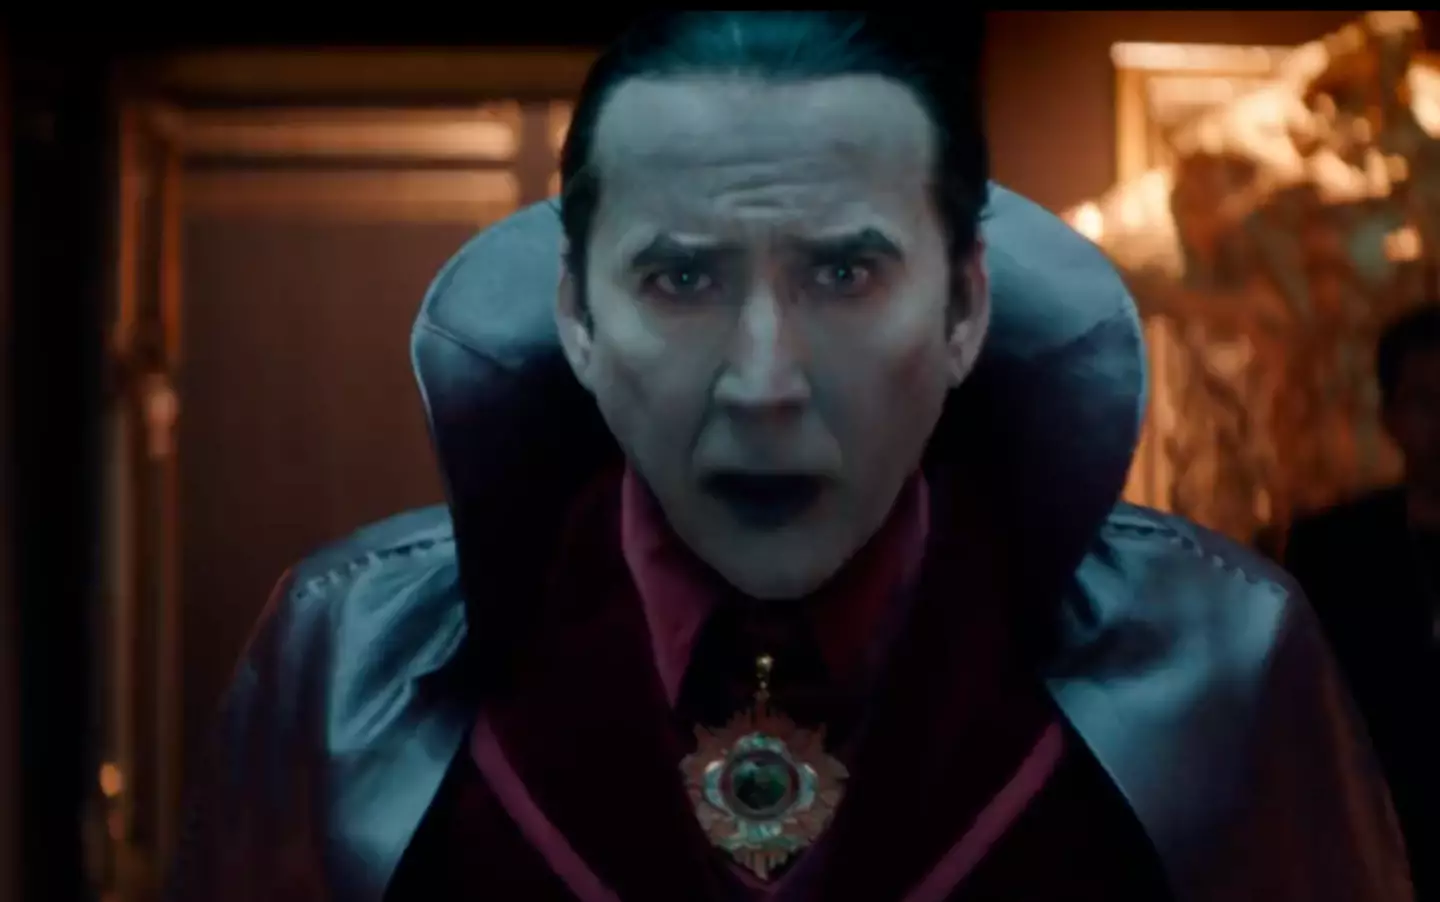 With a cape and teeth like that and now played by Nicolas Cage, Renfield's Dracula was always going to be melodramatic.